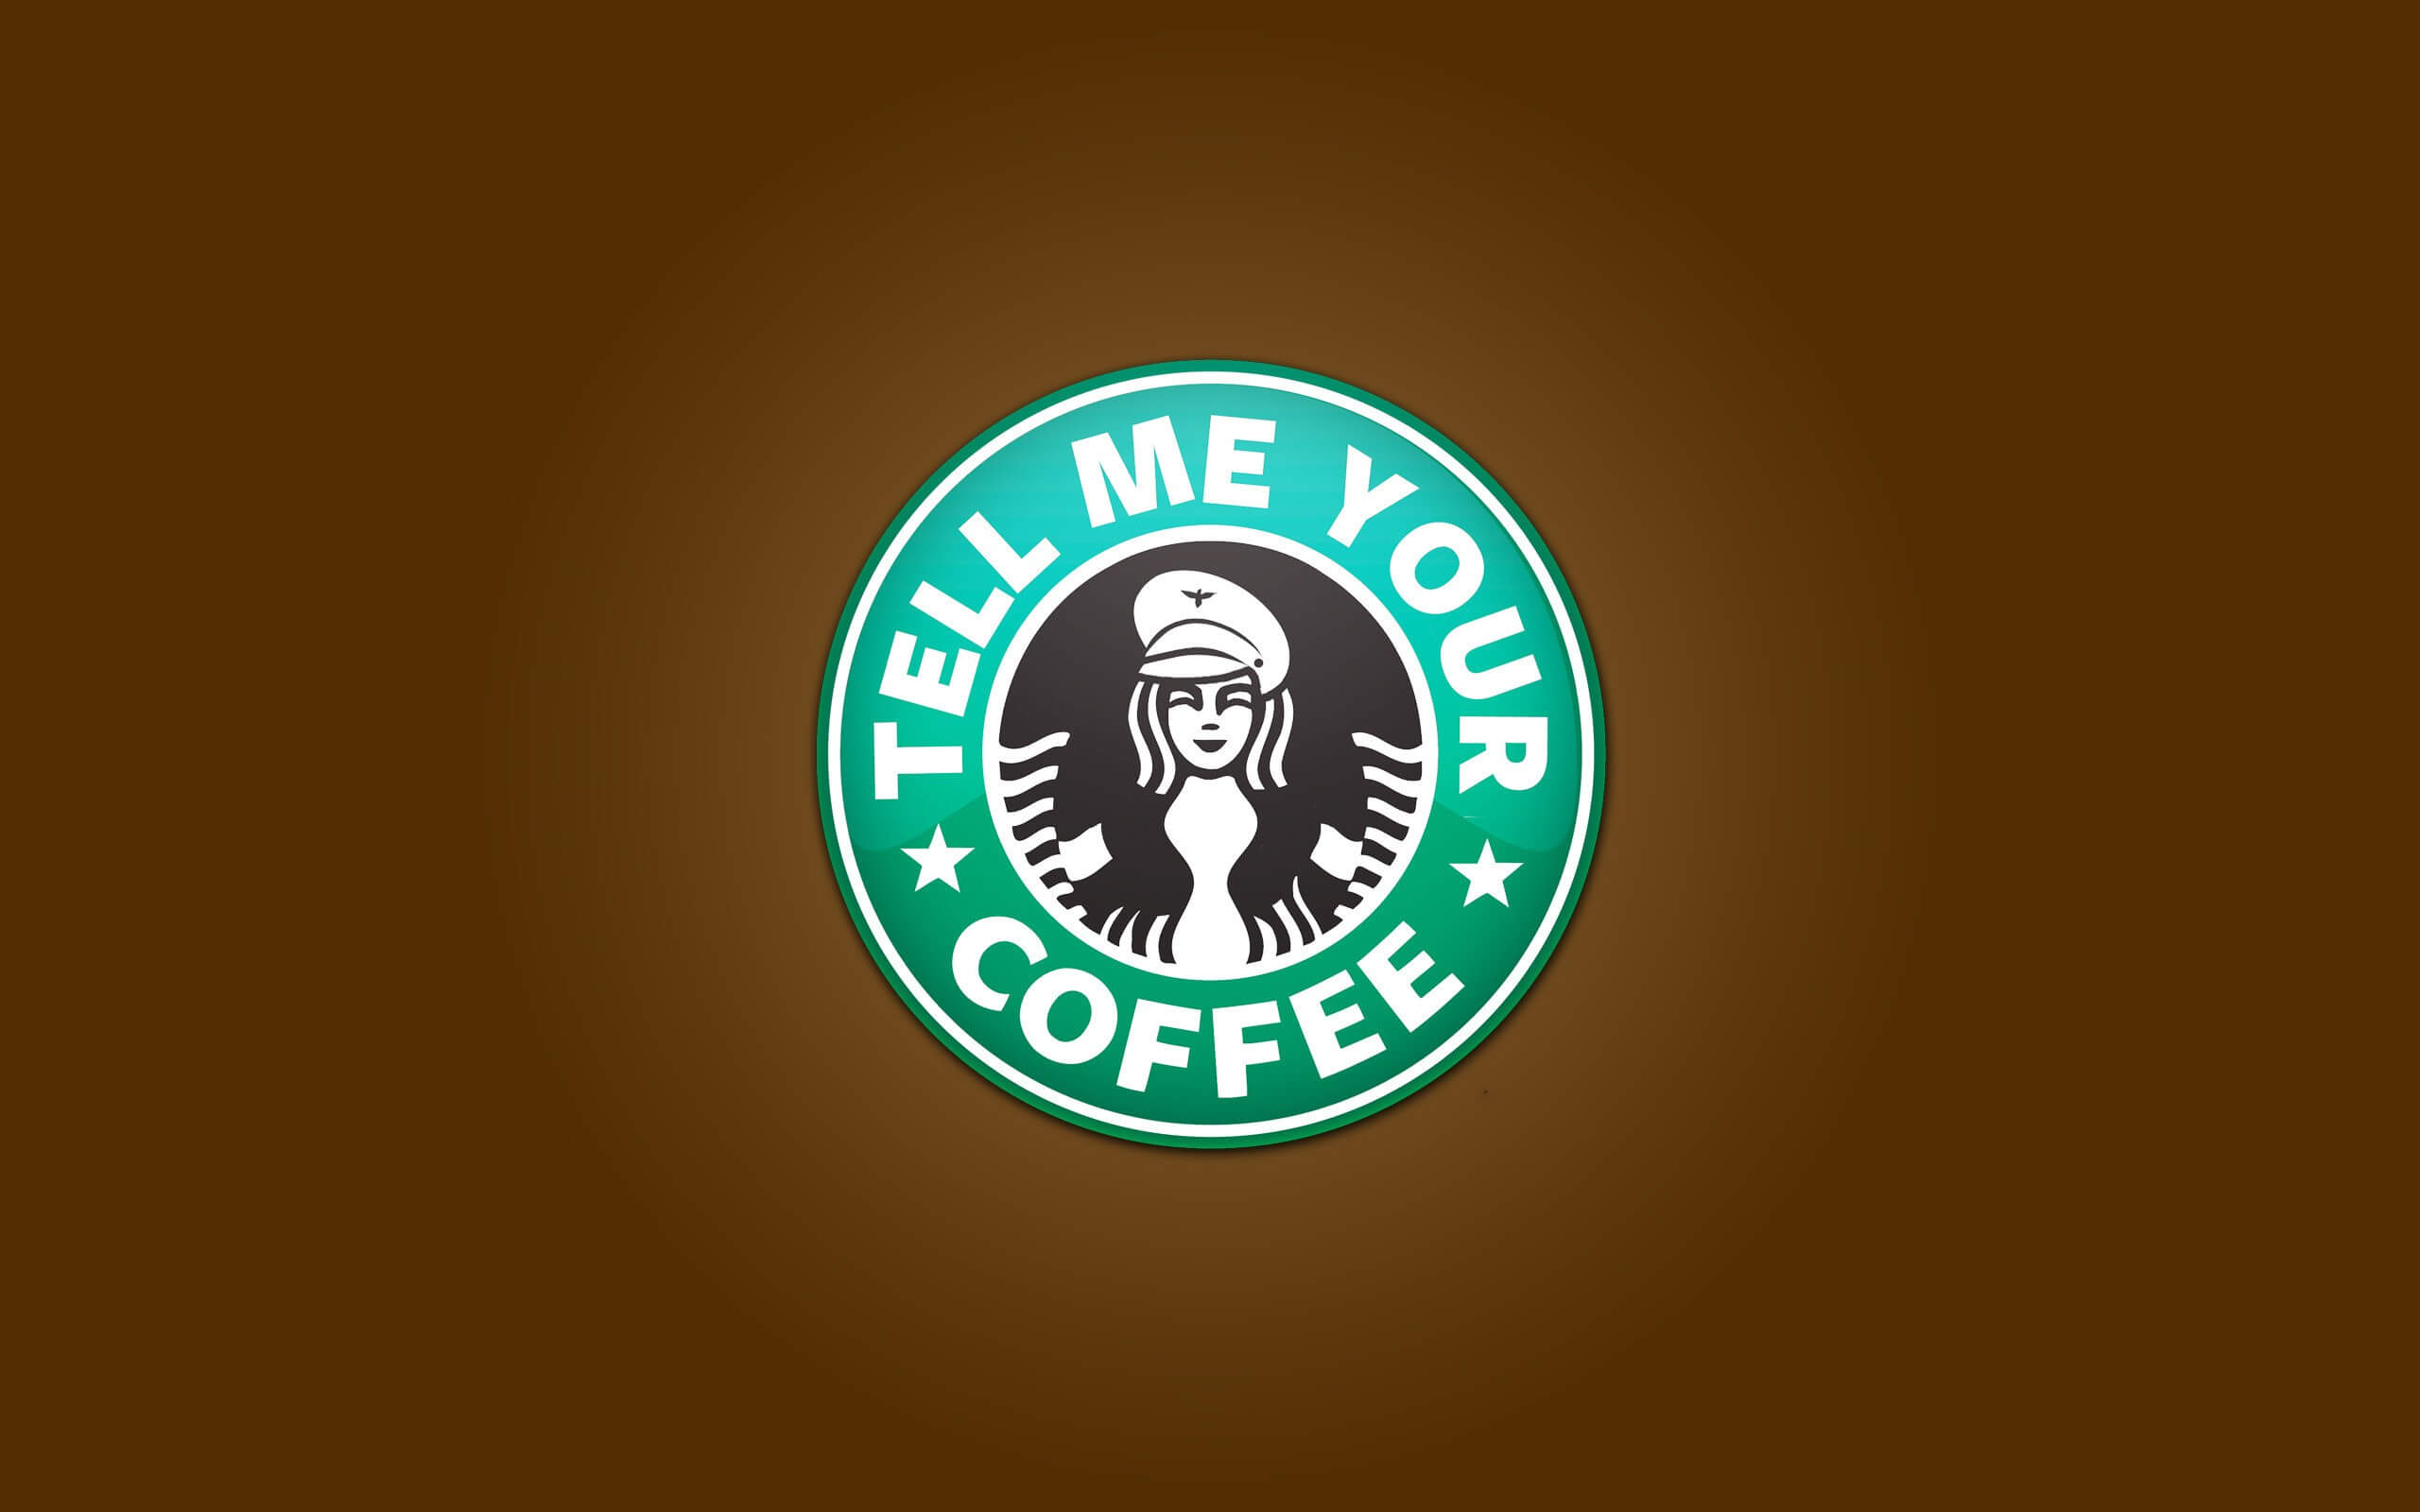 Starbucks Graphic Backgrounds For Powerpoint Templates – Ppt Intended For Starbucks Powerpoint Template